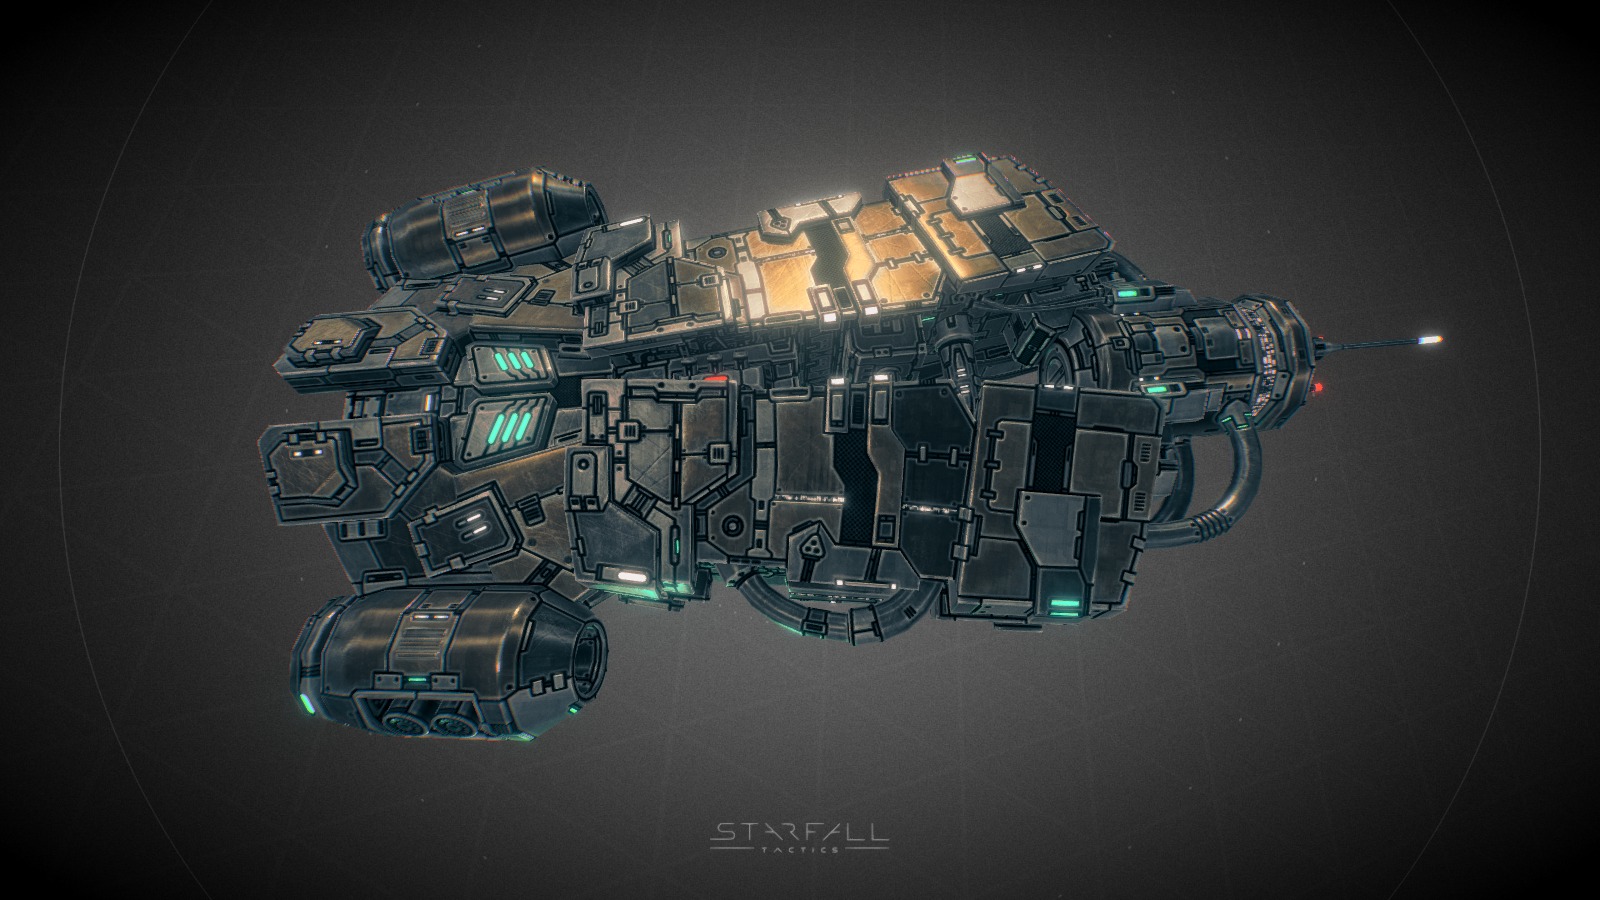 In-game model of a medium spaceship belonging to the Deprived faction.
Learn more about the game at http://starfalltactics.com/ - Starfall Tactics — Salem Deprived battleship - 3D model by Snowforged Entertainment (@snowforged) 3d model